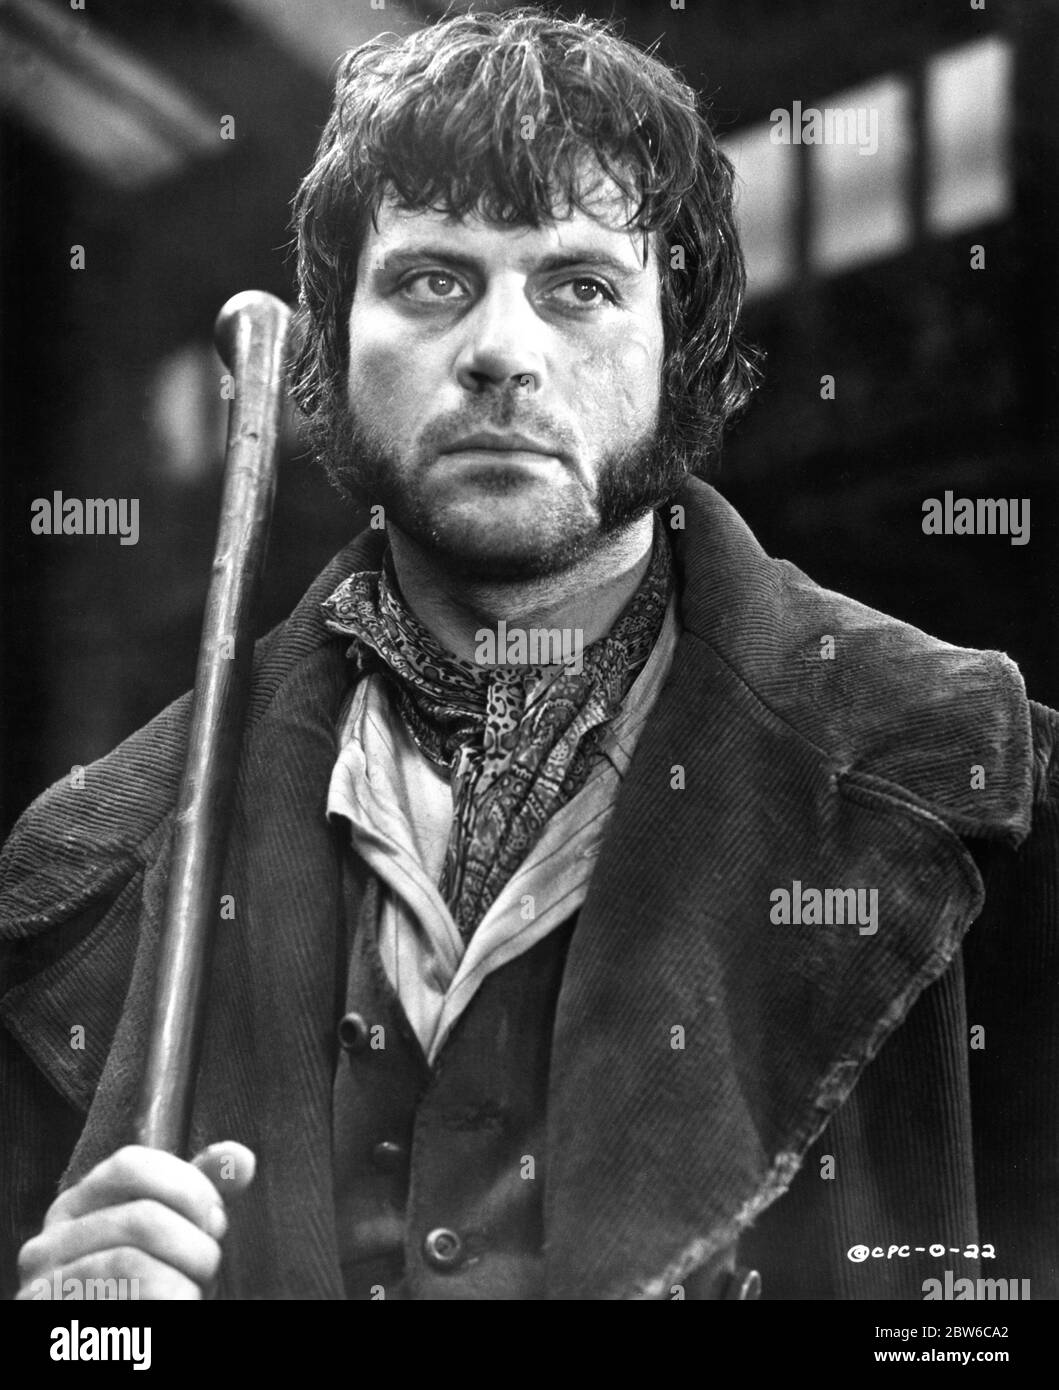 Oliver Reed on the set of Oliver! (1968) : r/Picturesofcelebrities